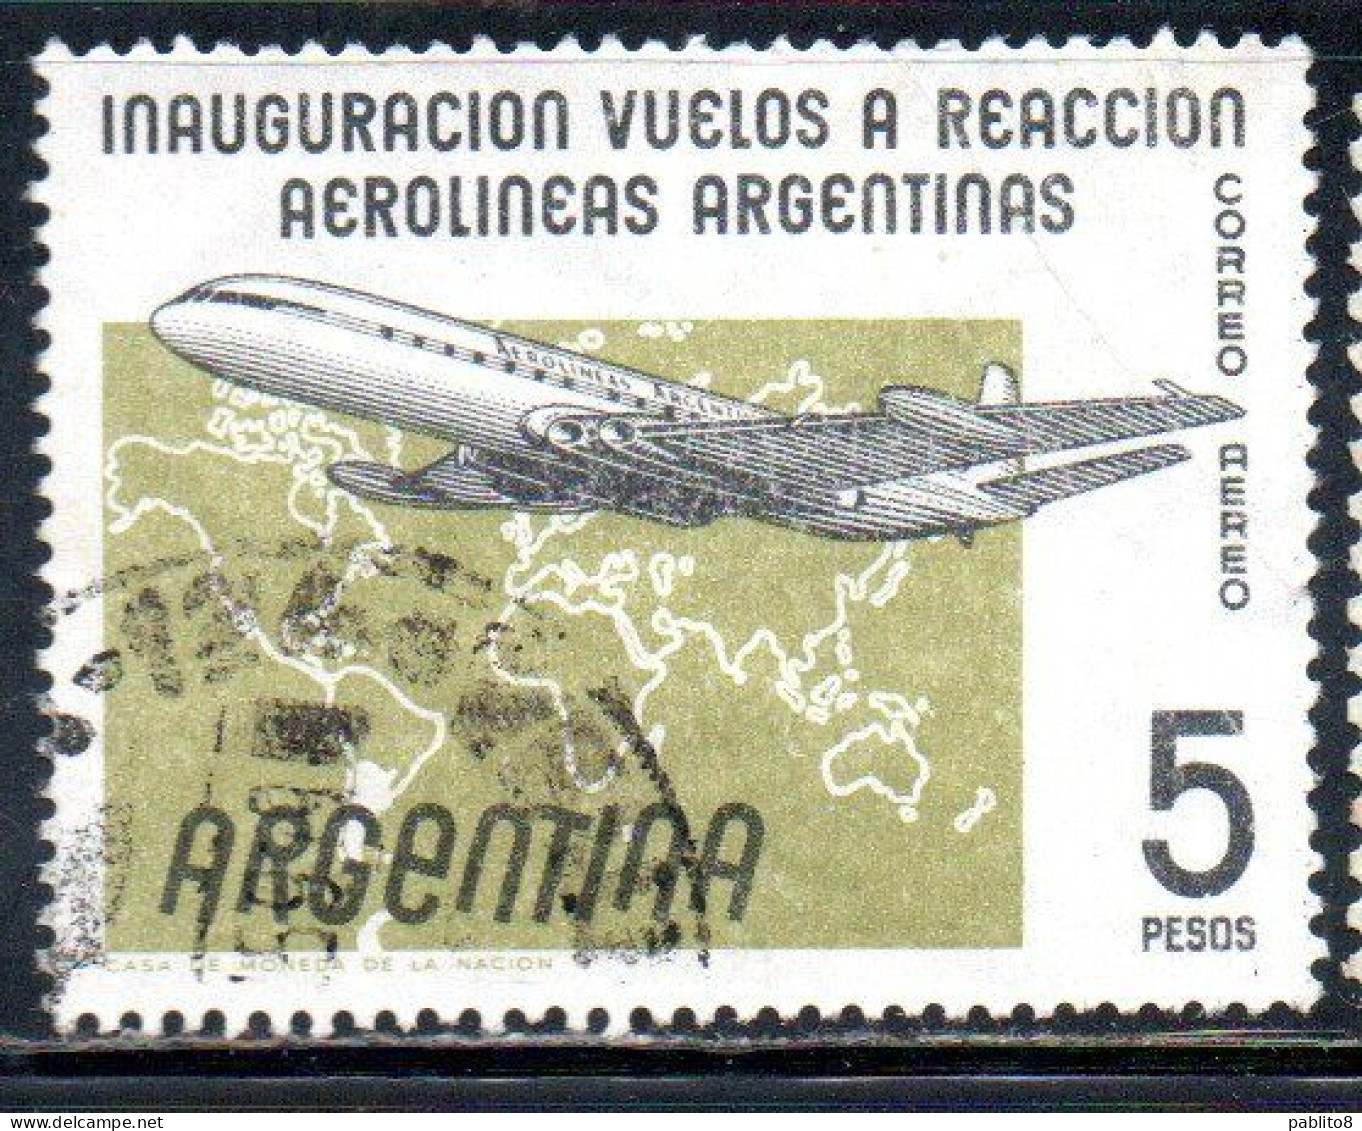 ARGENTINA 1959 AIR POST MAIL AIRMAIL CORREO AEREO JET FLIGHT OF ARGENTINE AIRLINES COMET OVER WORLD MAP 5p USED USADO - Luchtpost